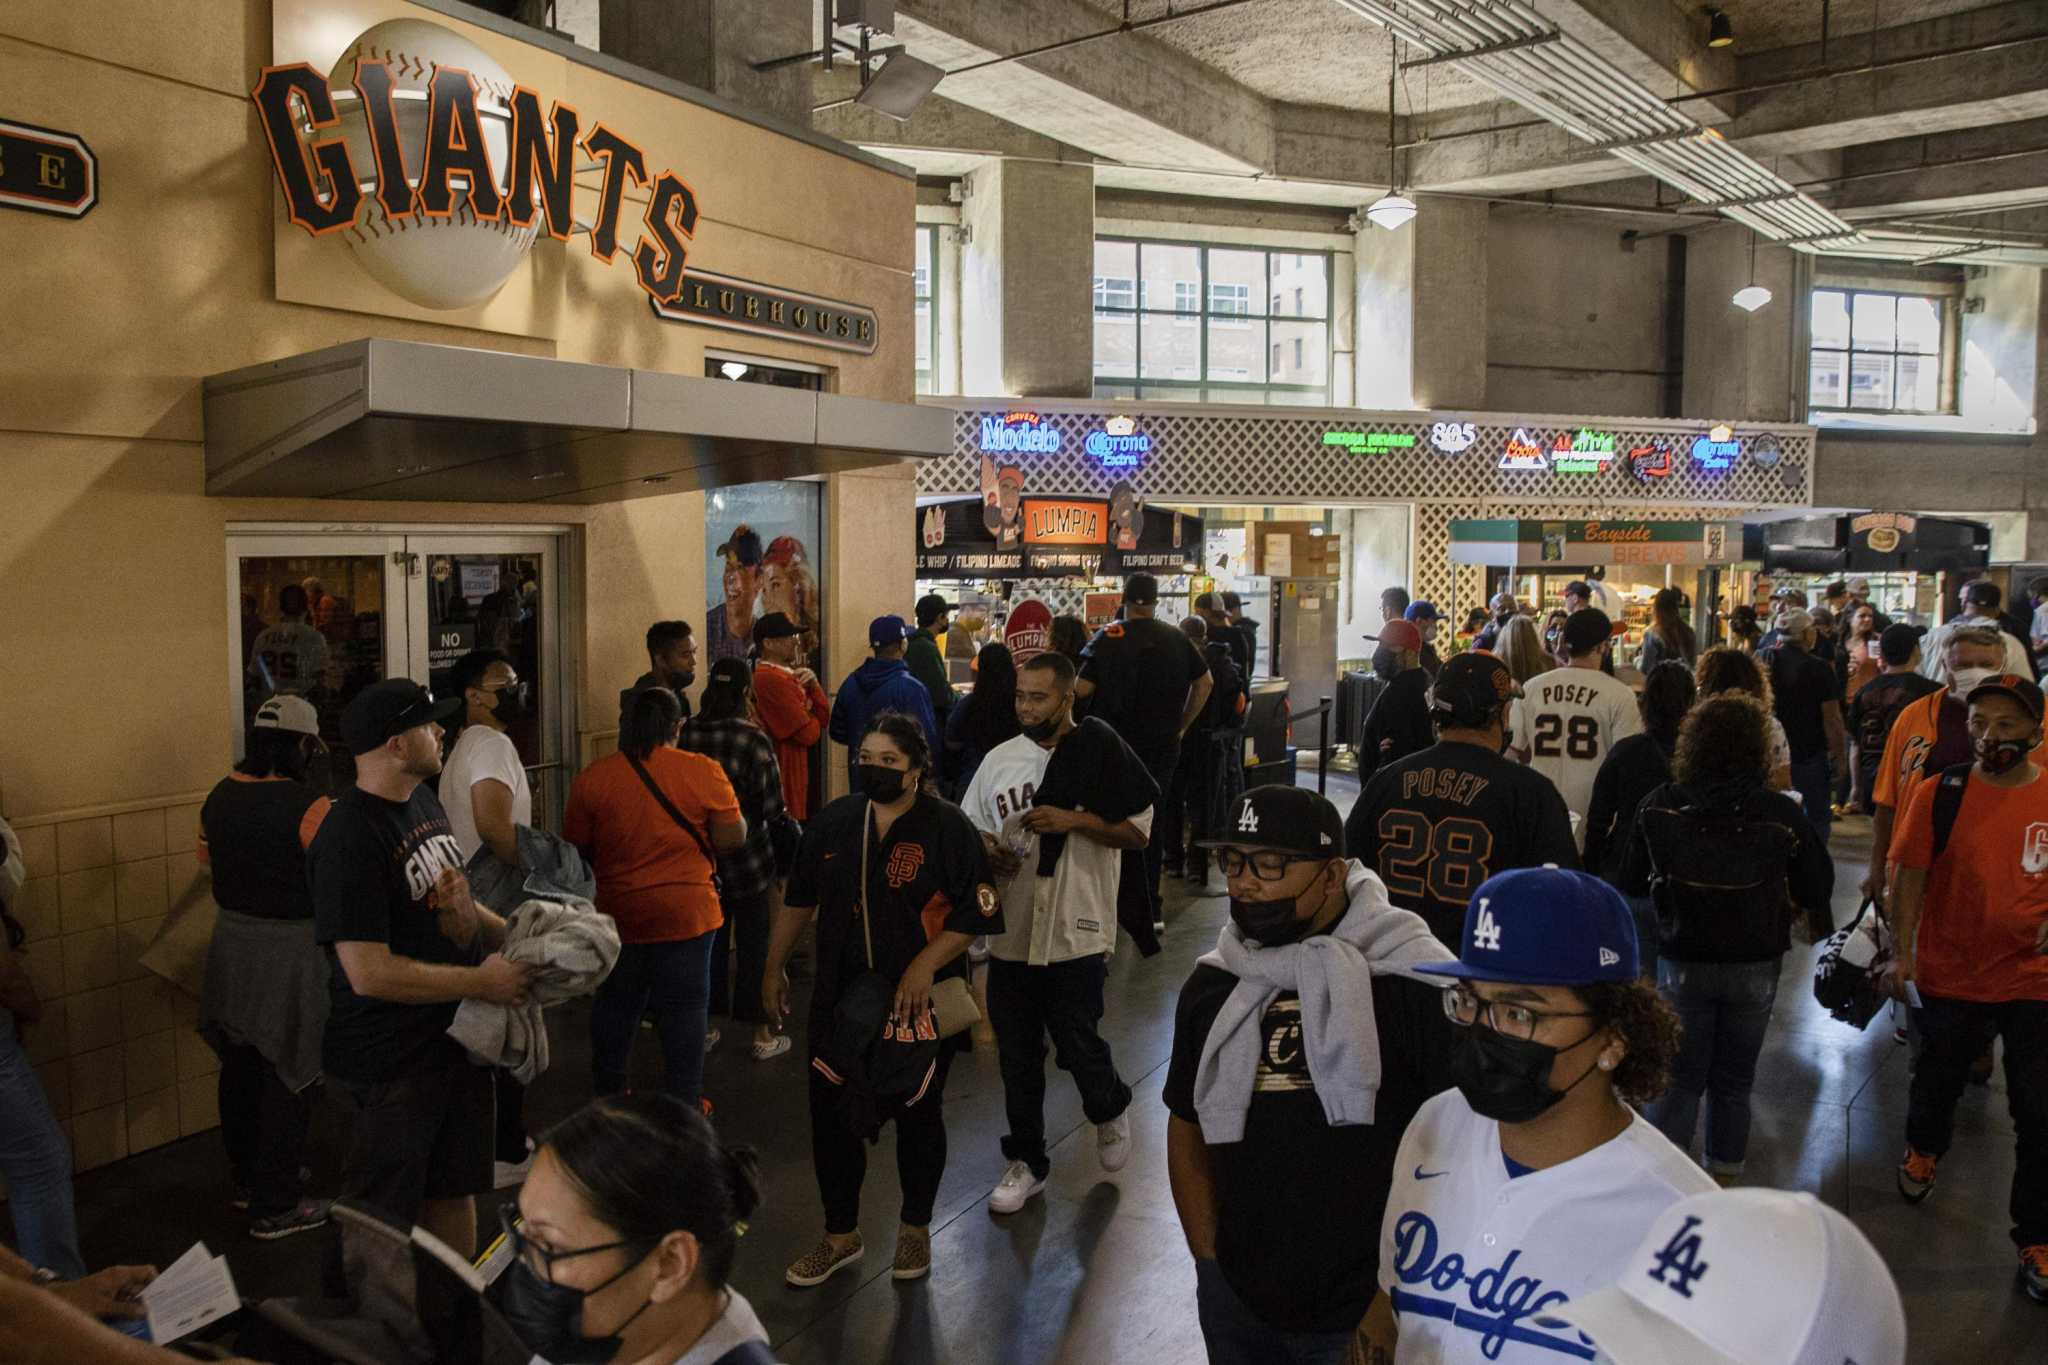 New Dodger Stadium Amenities Include Remodeled Top Of The Park